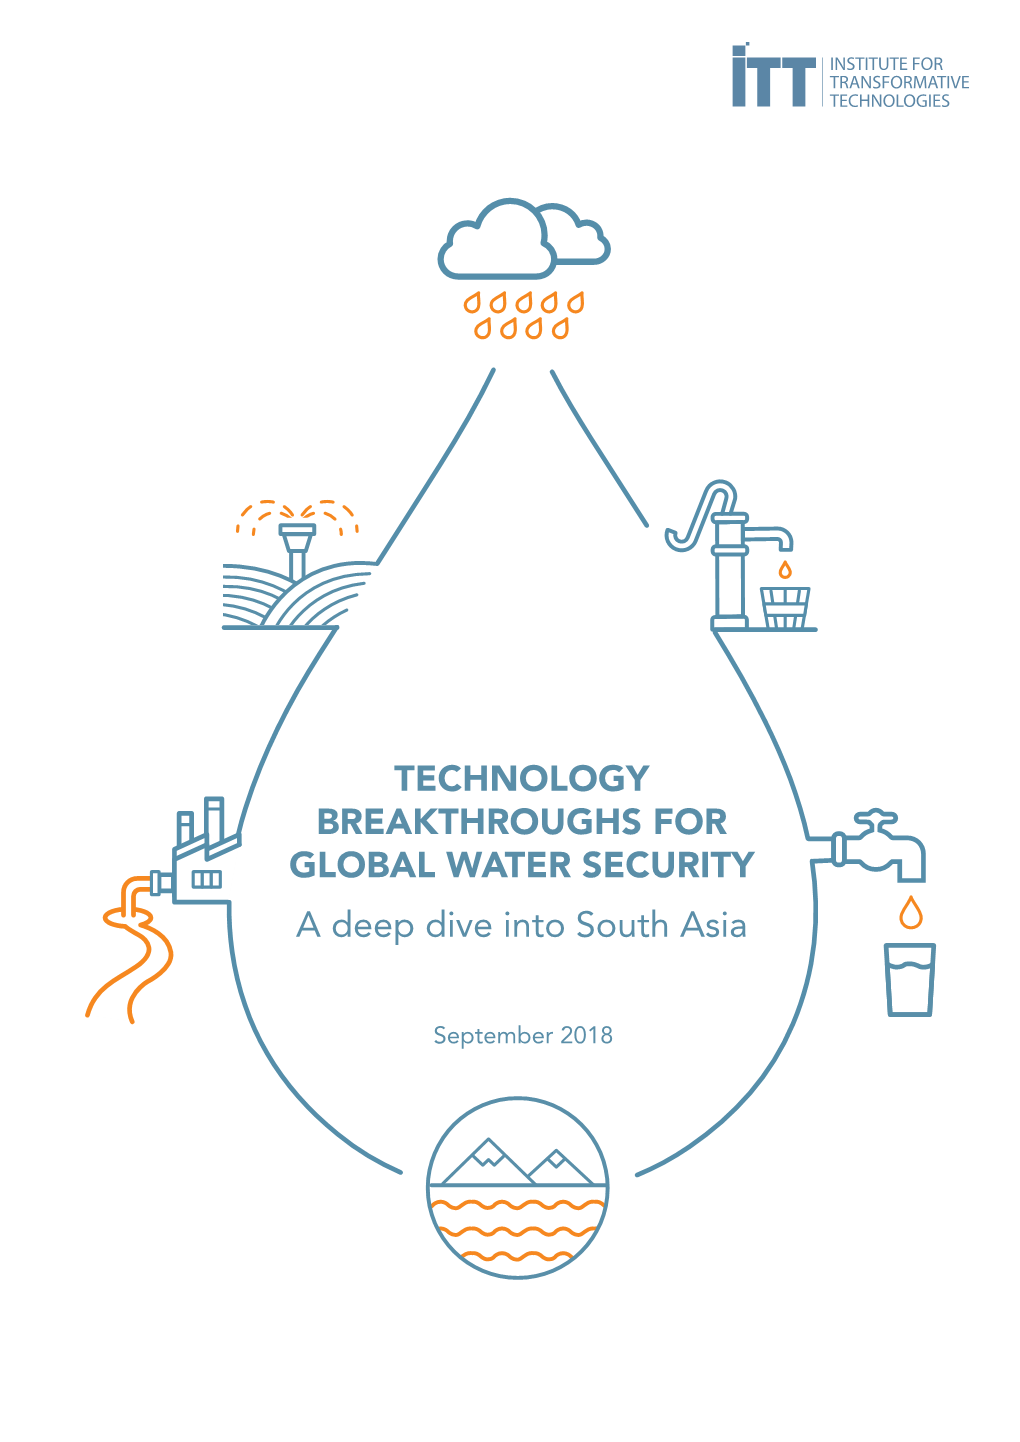 TECHNOLOGY BREAKTHROUGHS for GLOBAL WATER SECURITY a Deep Dive Into South Asia